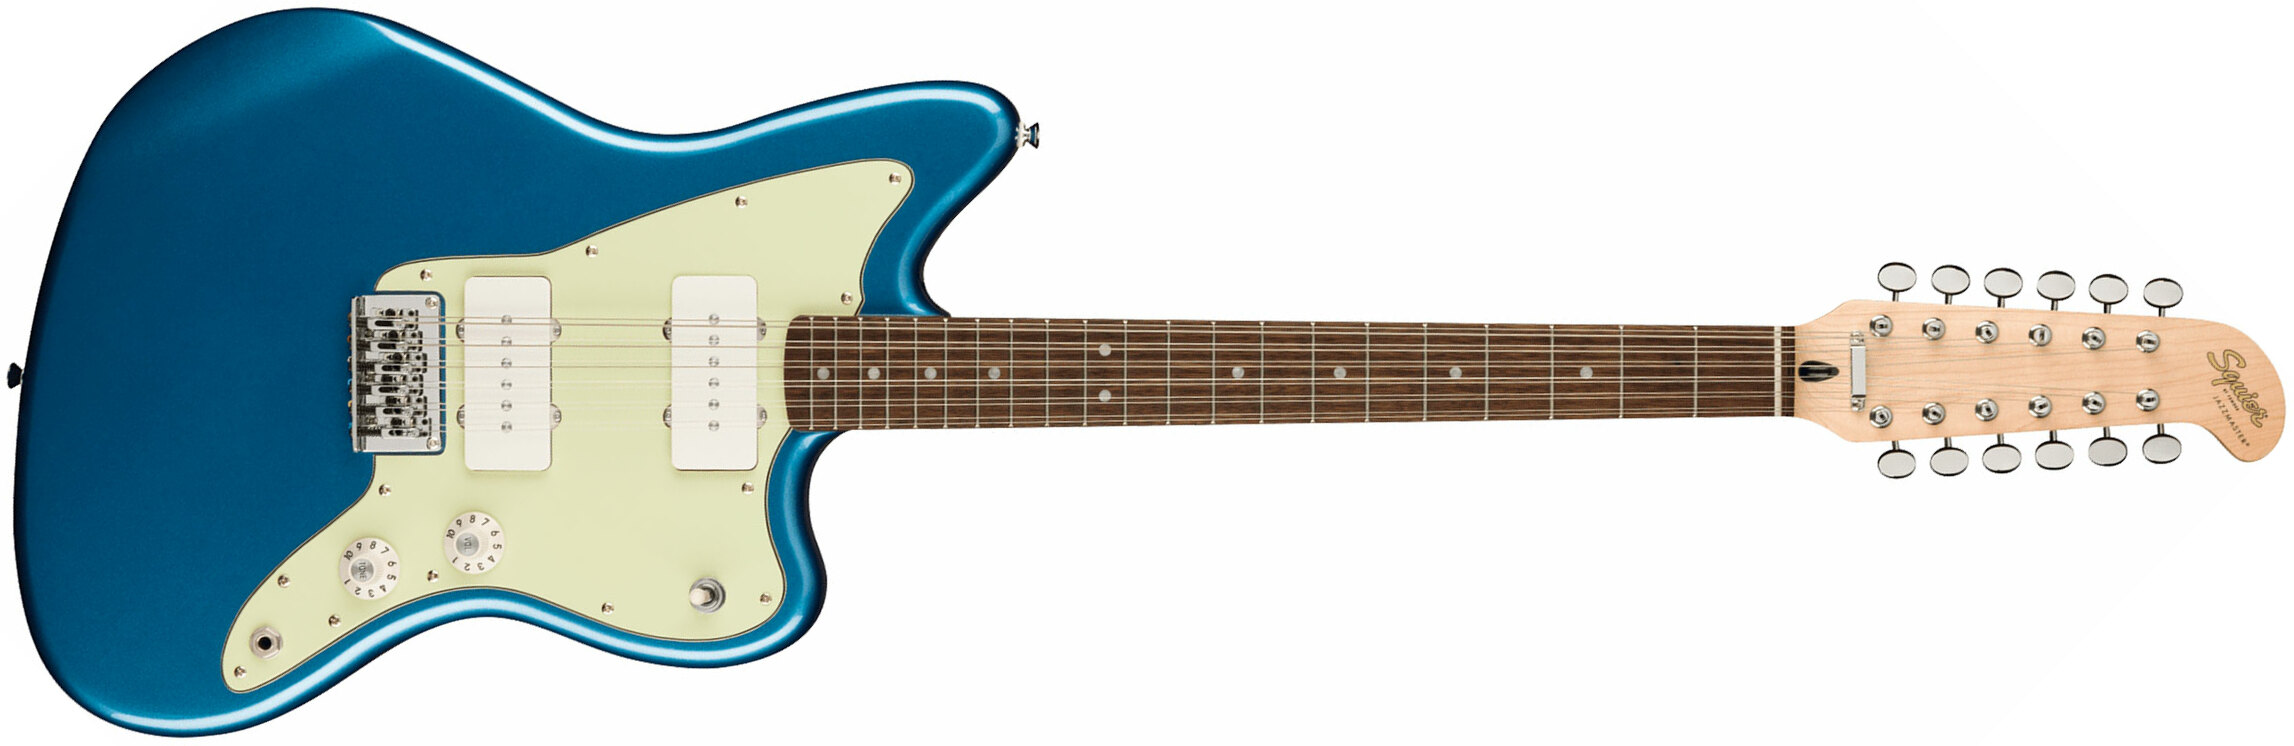 Squier Jazzmaster Xii Paranormal 2s Ht Lau - Lake Placid Blue - 12 string electric guitar - Main picture